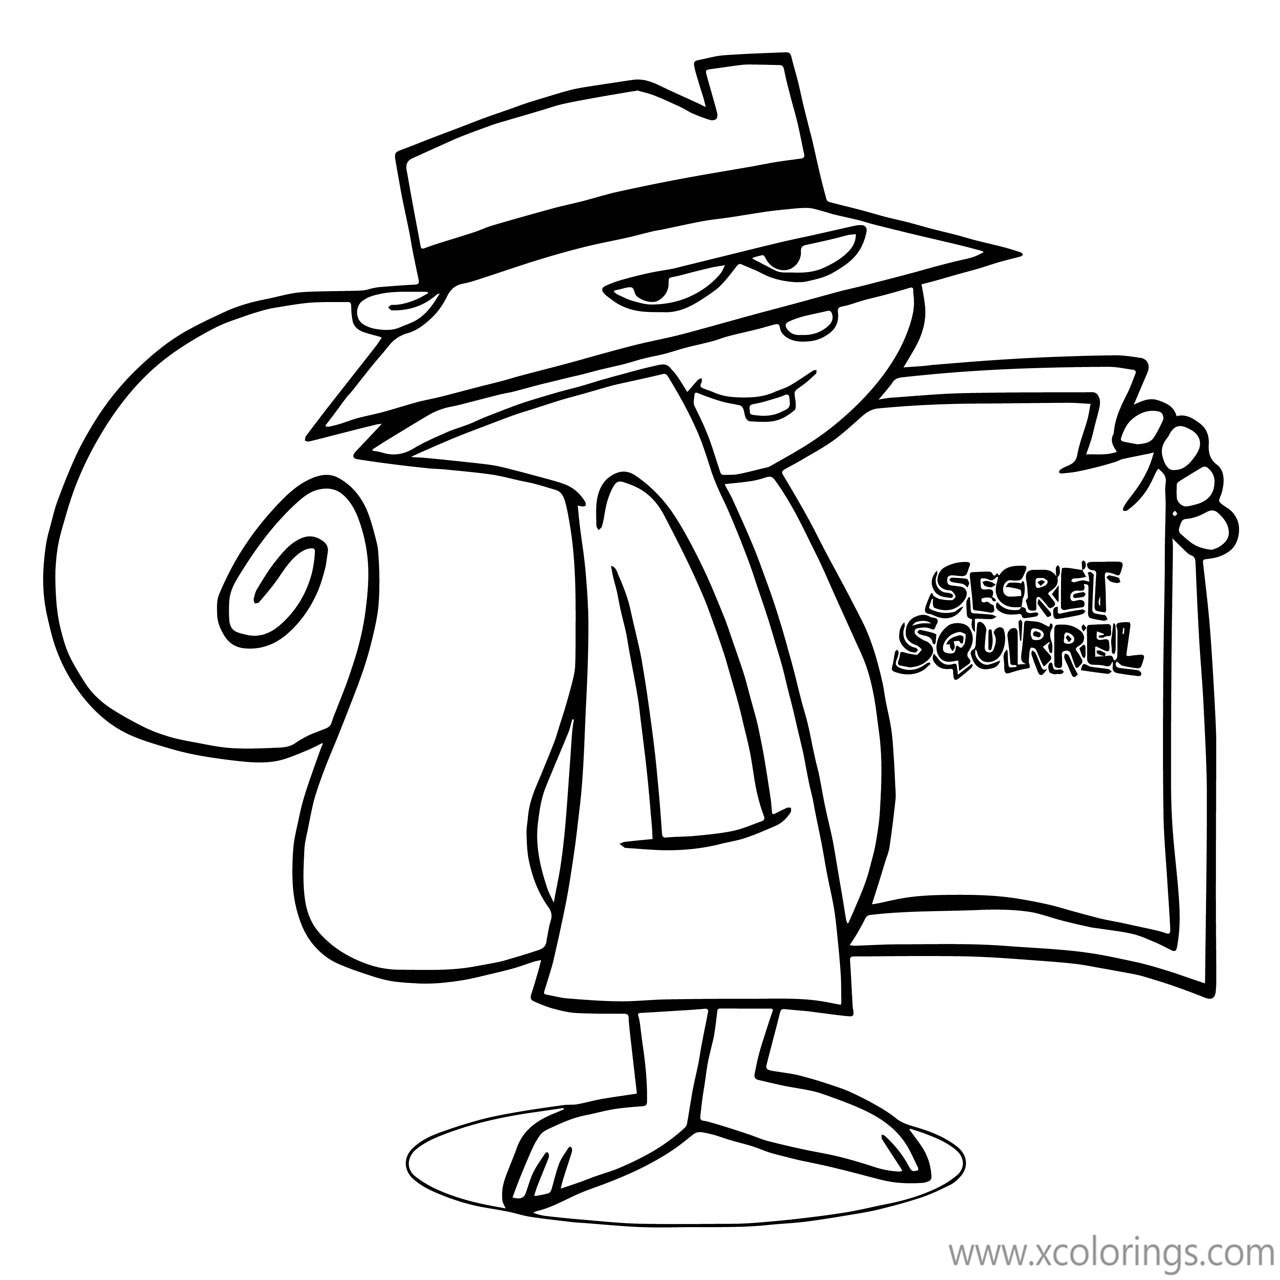 Free Secret Squirrel Opened His Jacket Coloring Page printable